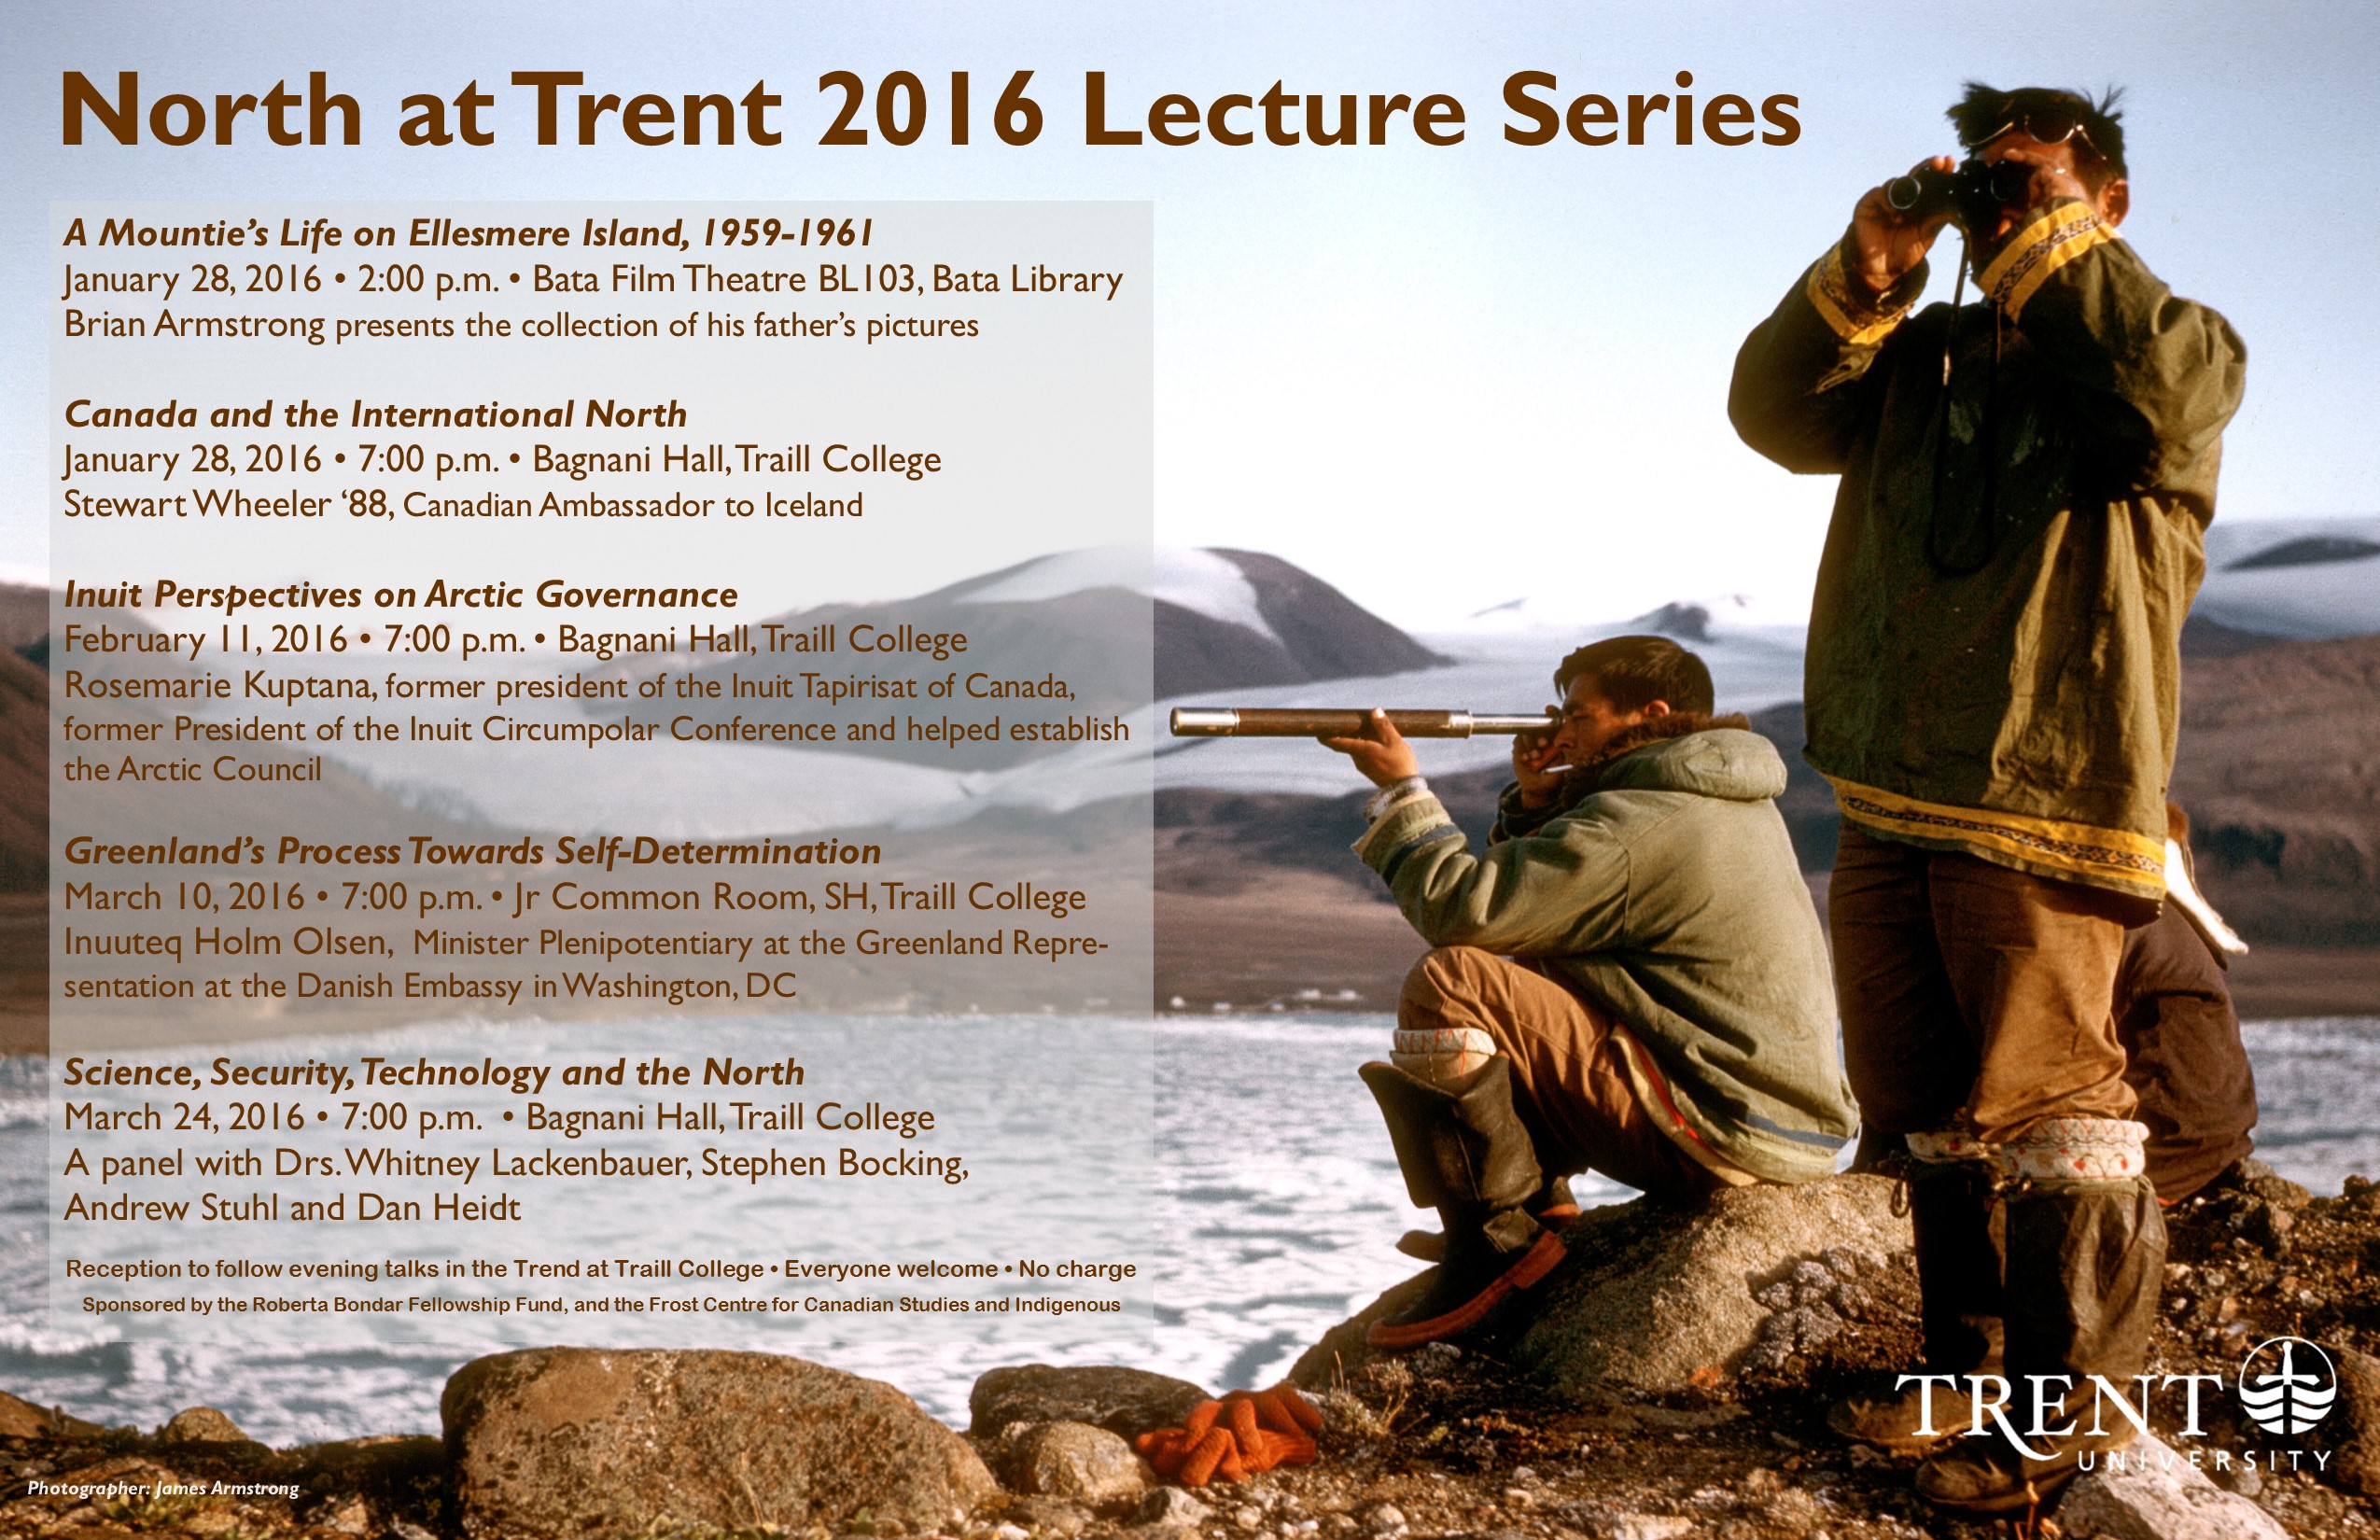 North at Trent 2016 Lecture Series